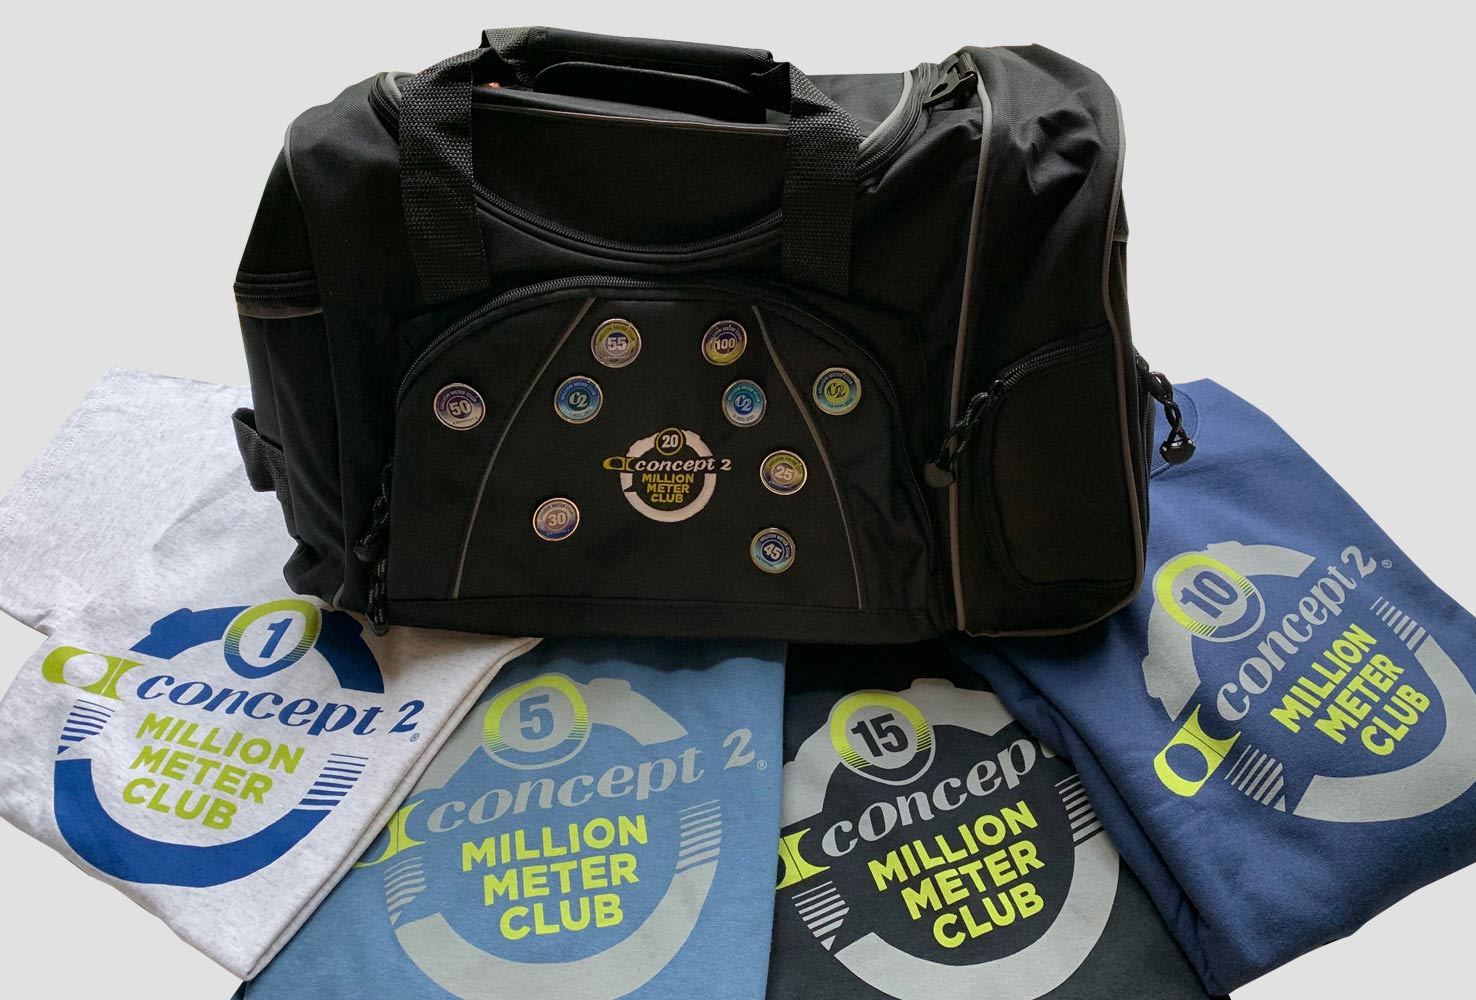 Concept2 Million meter club rewards include a bag, pins and t-shirts along the way